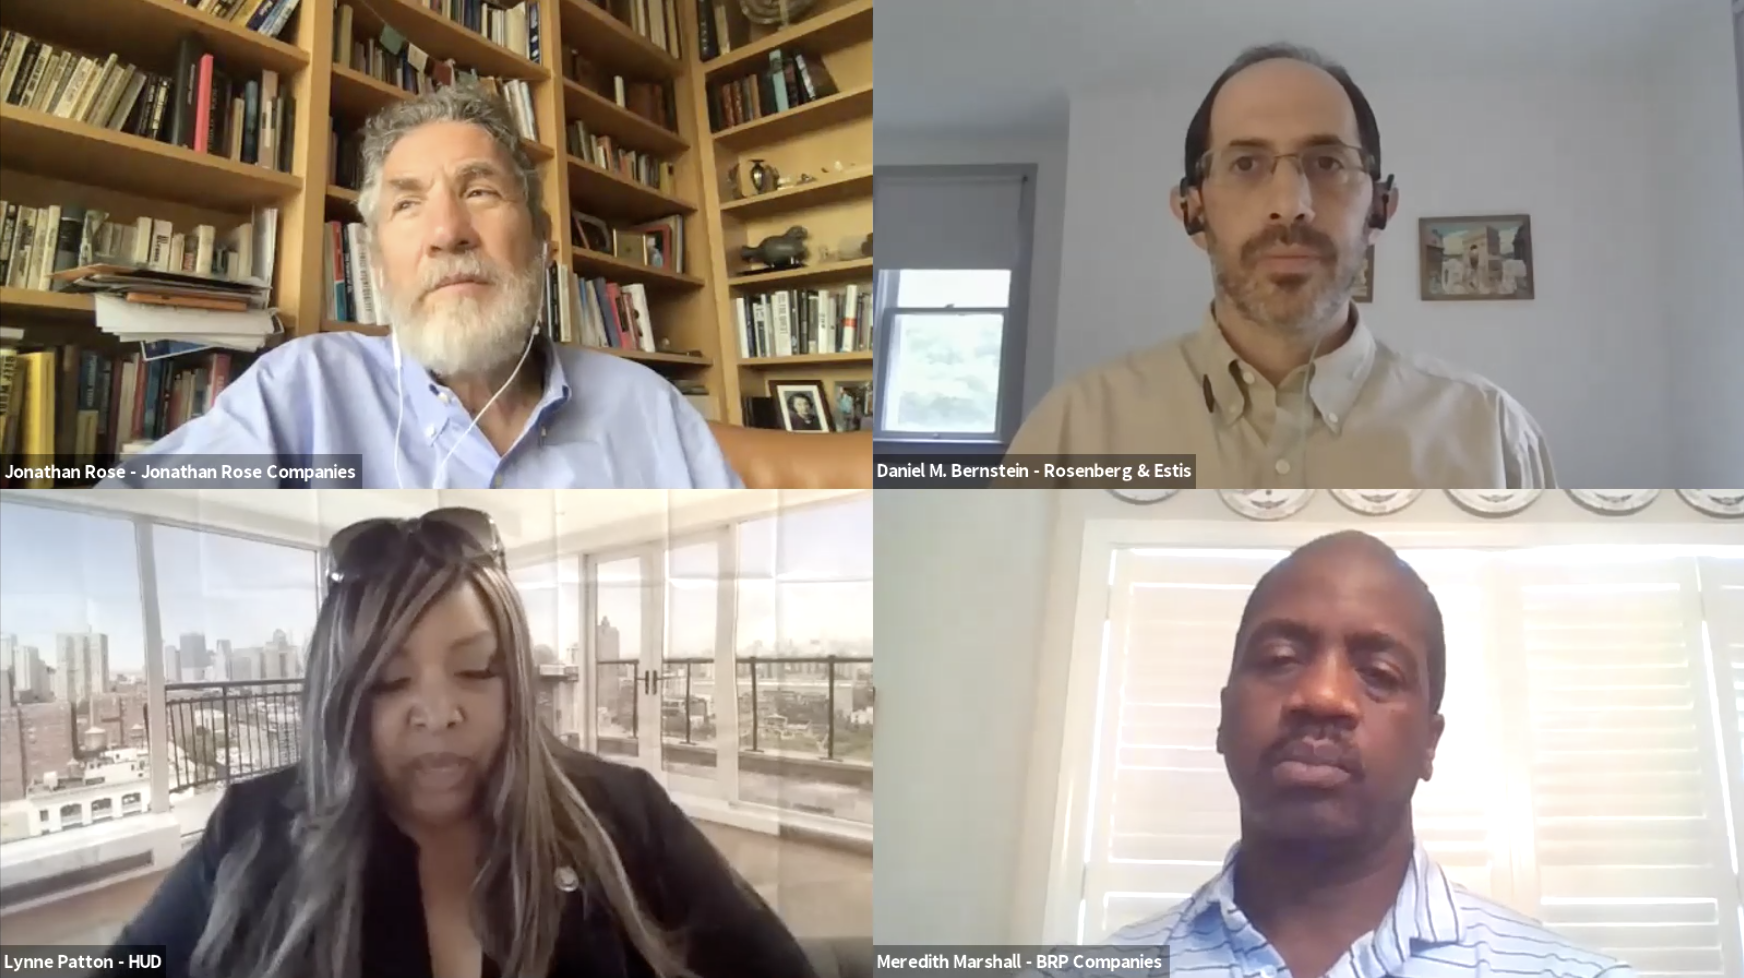 R&E member Daniel M. Bernstein, Jonathan Rose, Lynne Patton, and Meredith Marshall for Investing in Inclusivity webinar